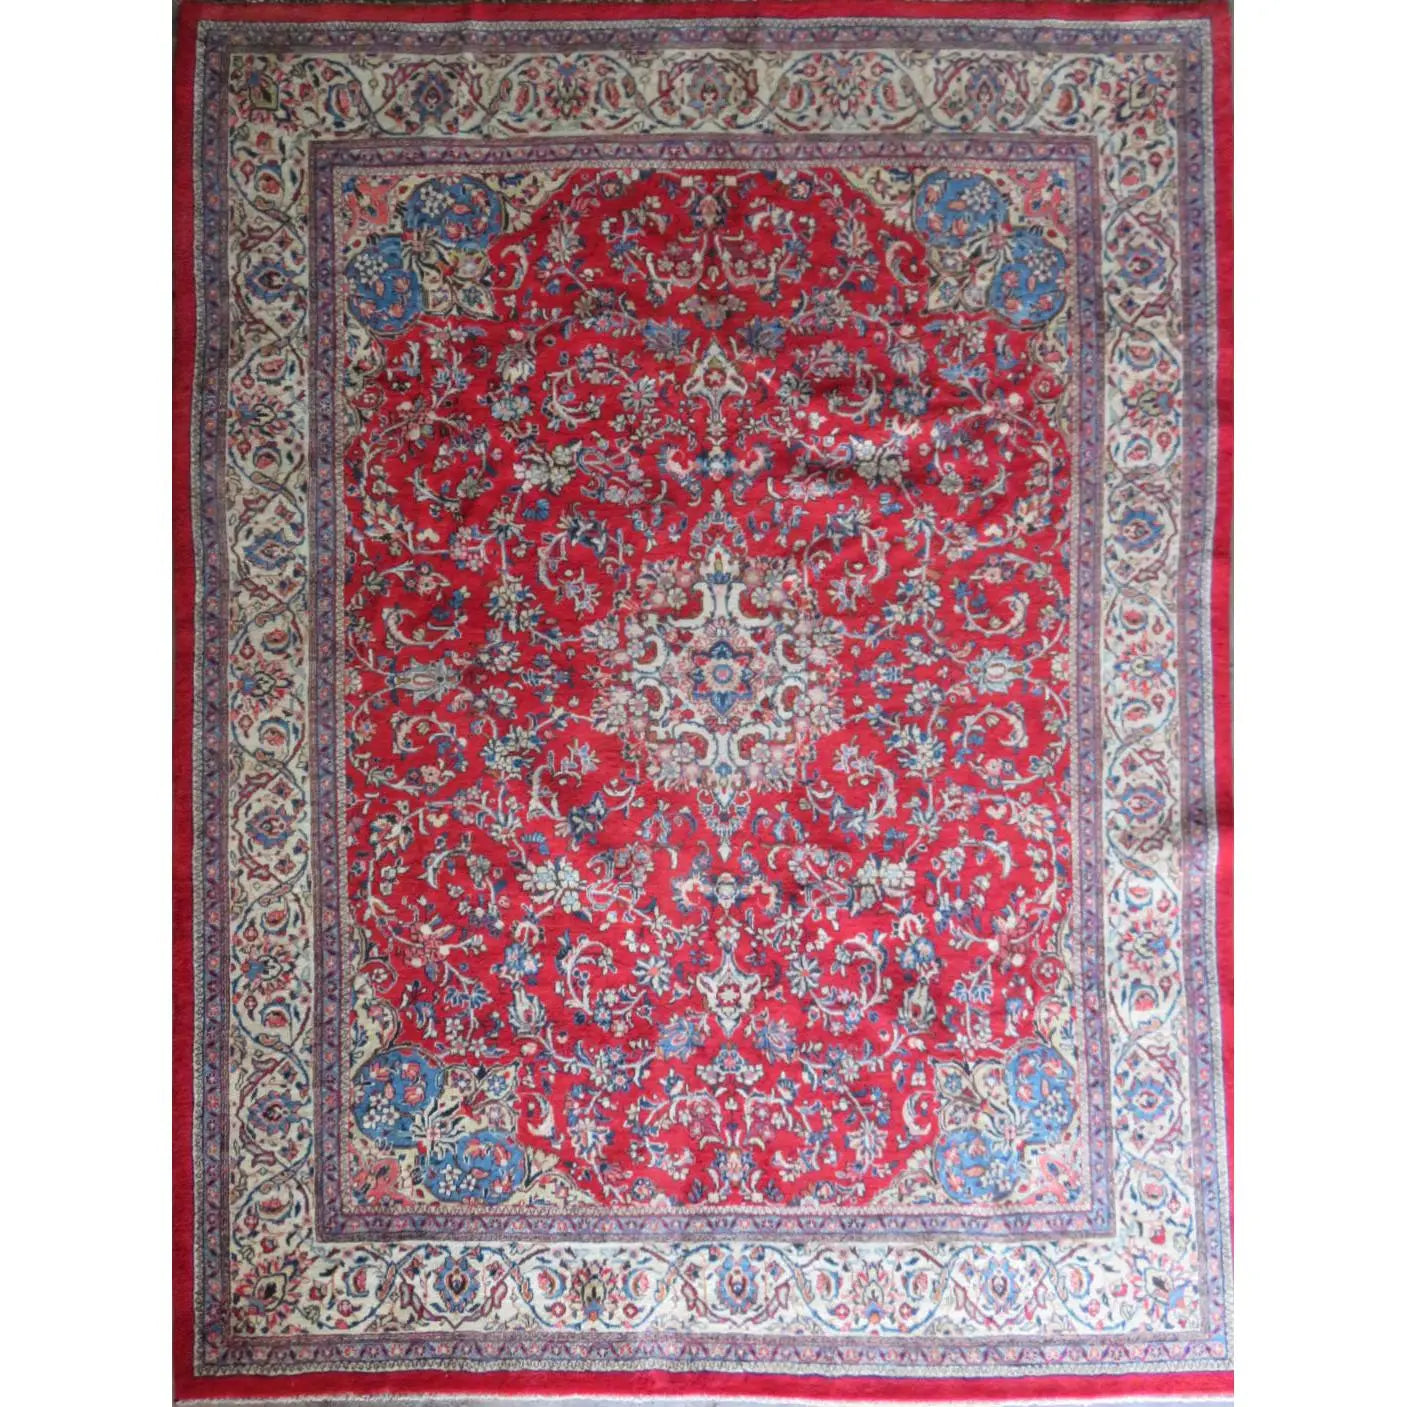 Hand-Knotted Persian Wool Rug – Luxurious Vintage Design, 12'9" x 9'6", Artisan Crafted